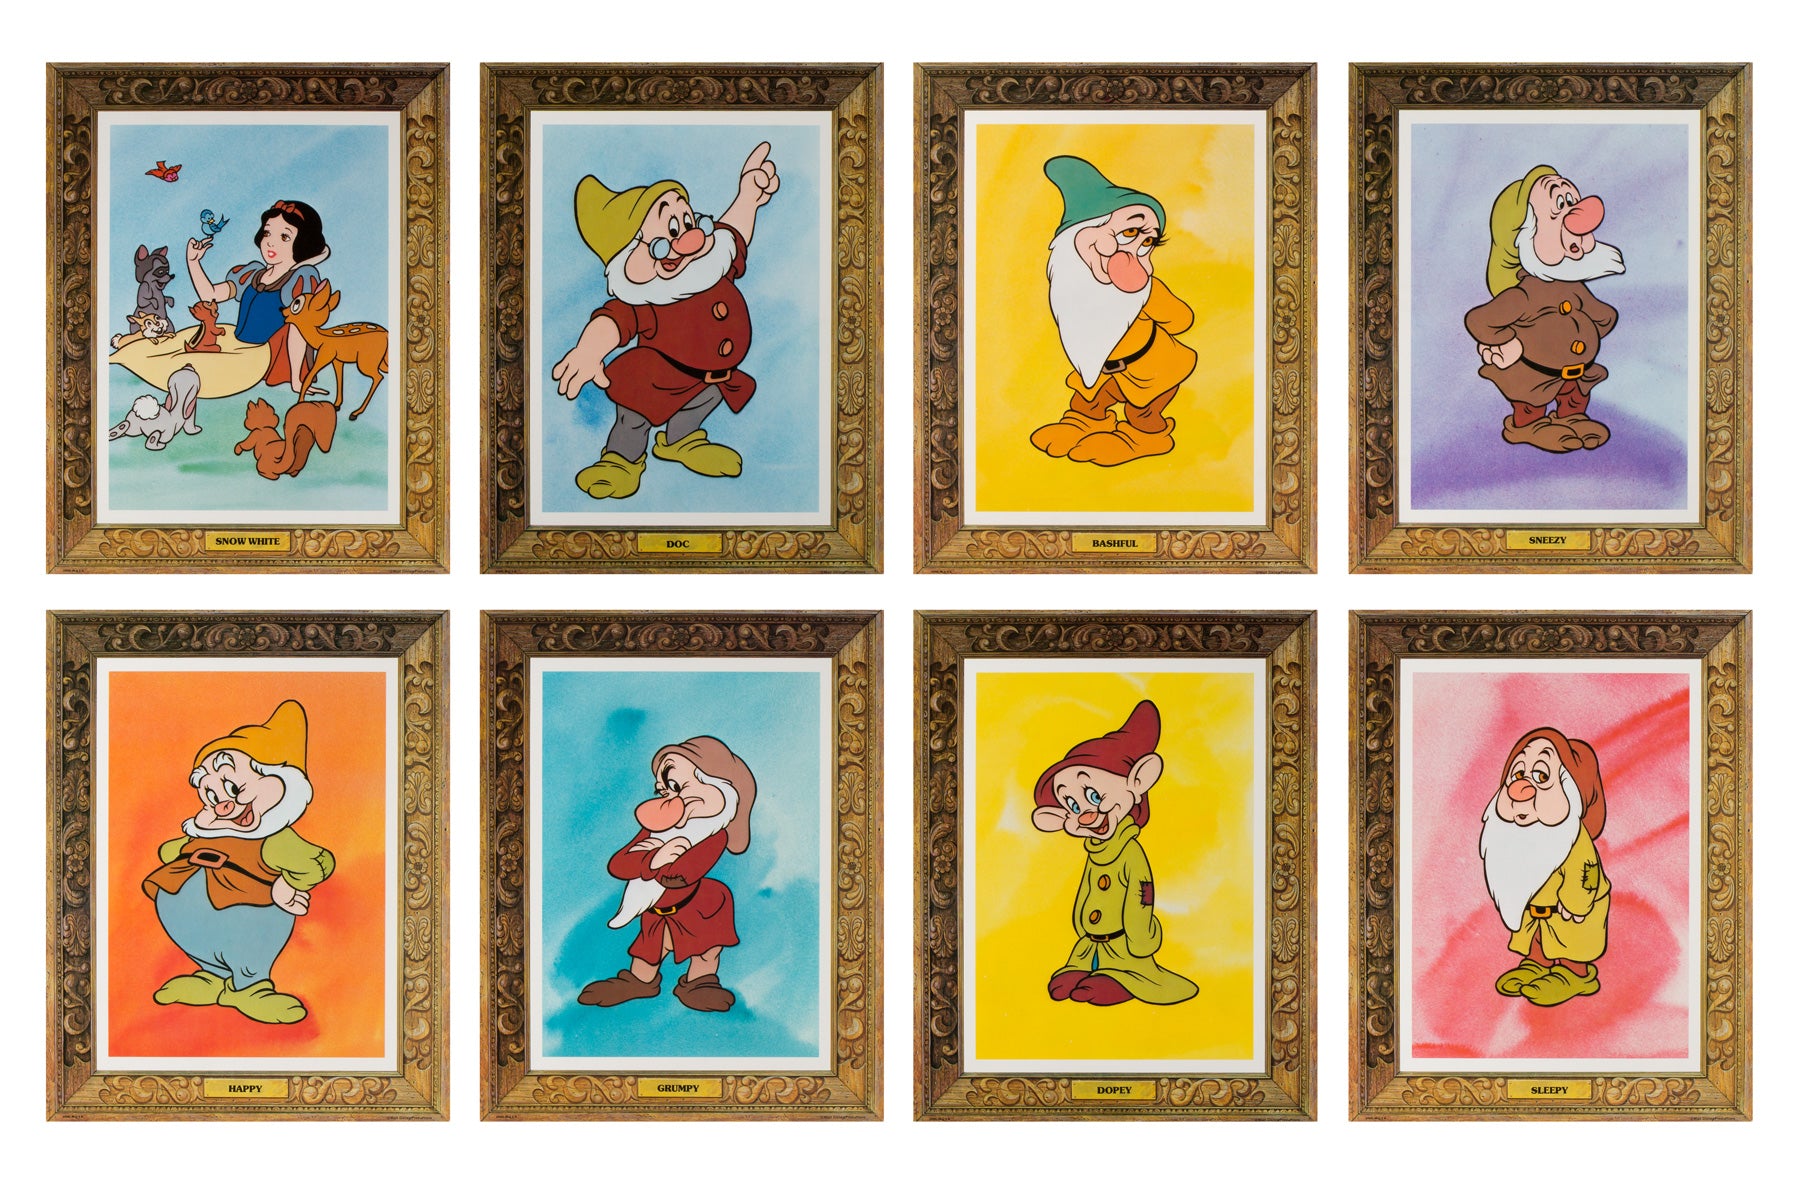 Snow White and the Seven Dwarfs R1975 US Lobby Cards Set